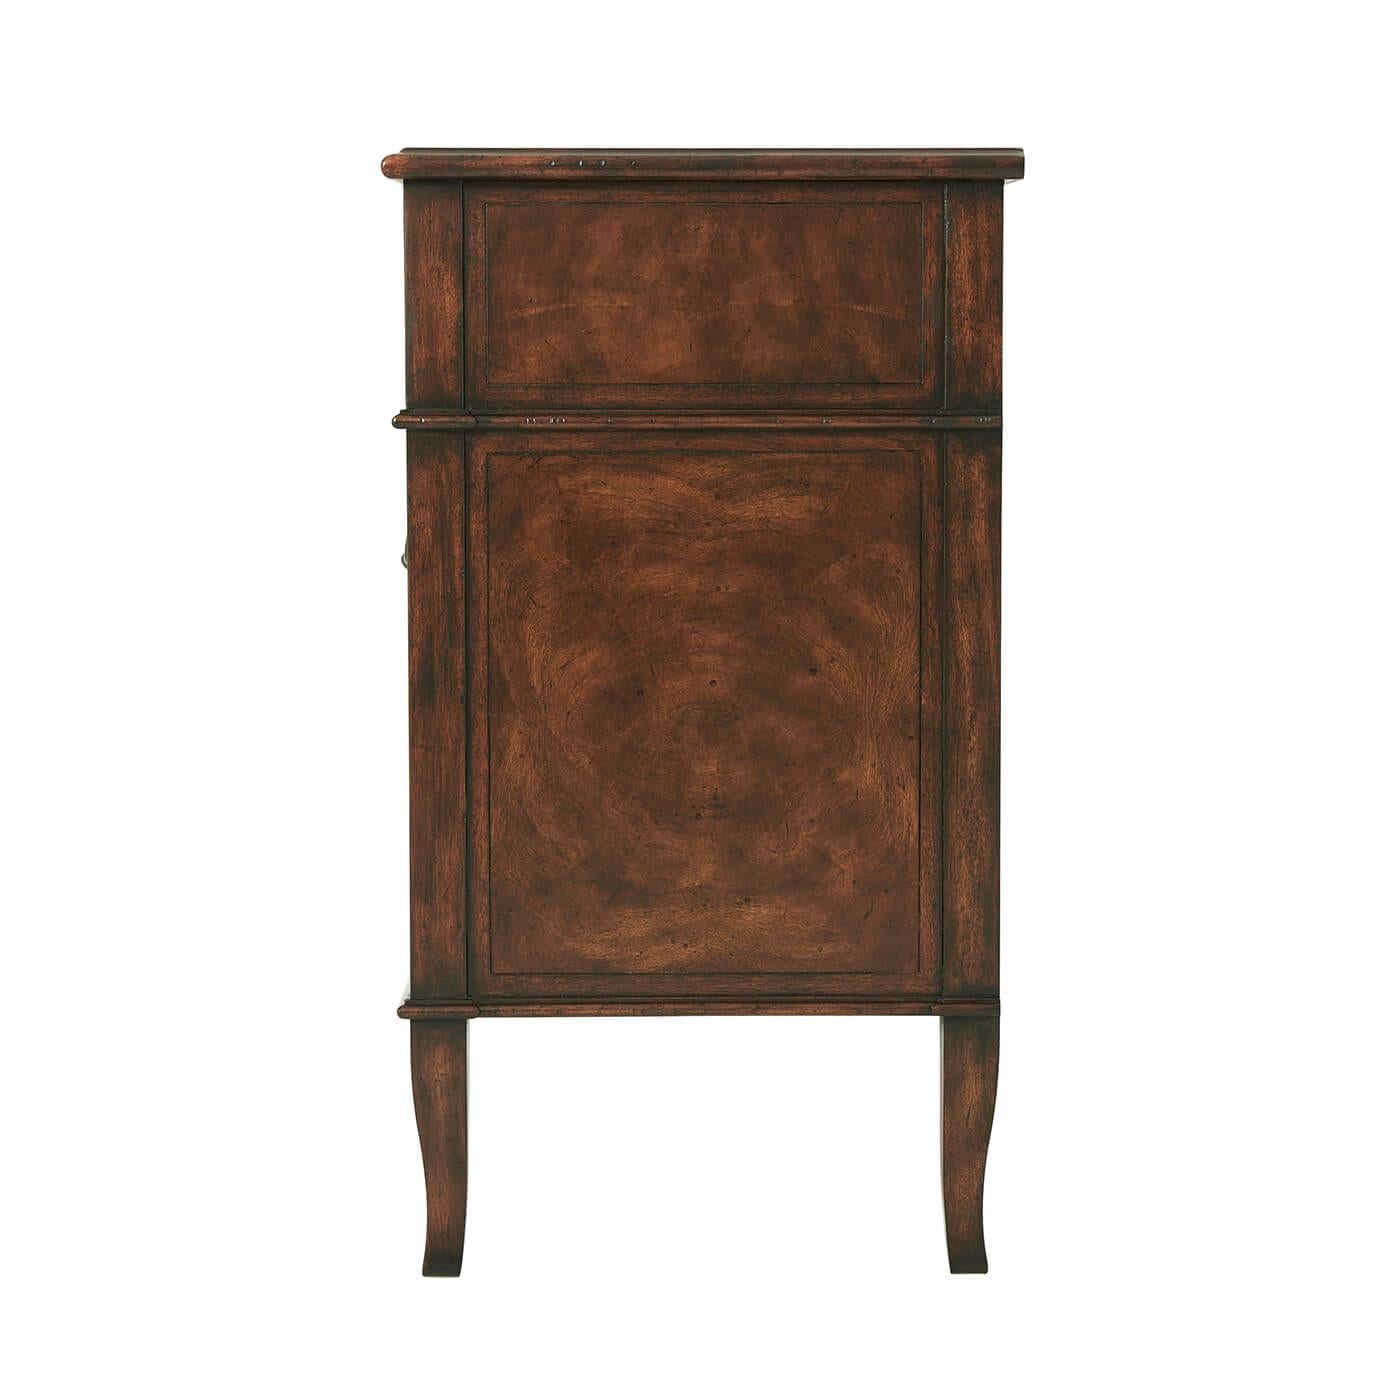 Neoclassical French Neoclassic Dresser For Sale